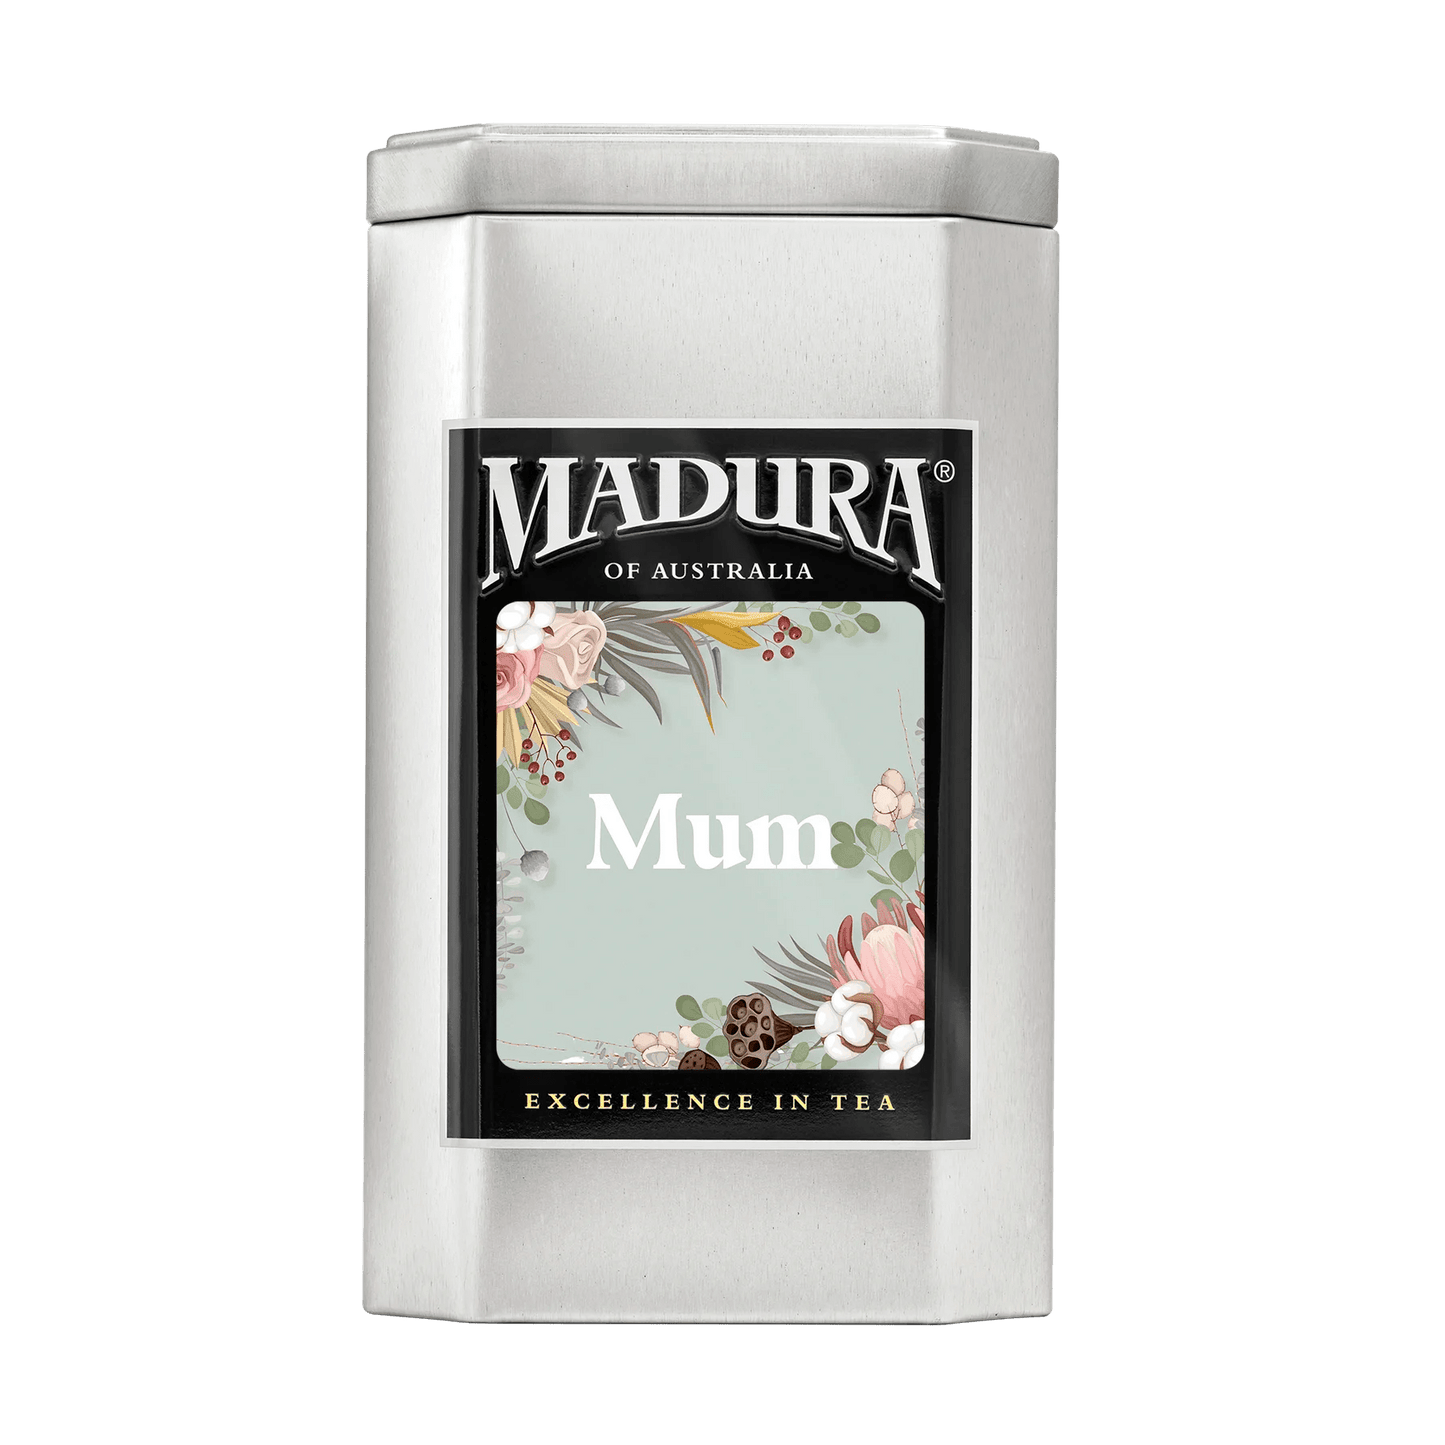 44 Tea Bags Caddy with Mothers Day Floral 2 Label - Madura Tea